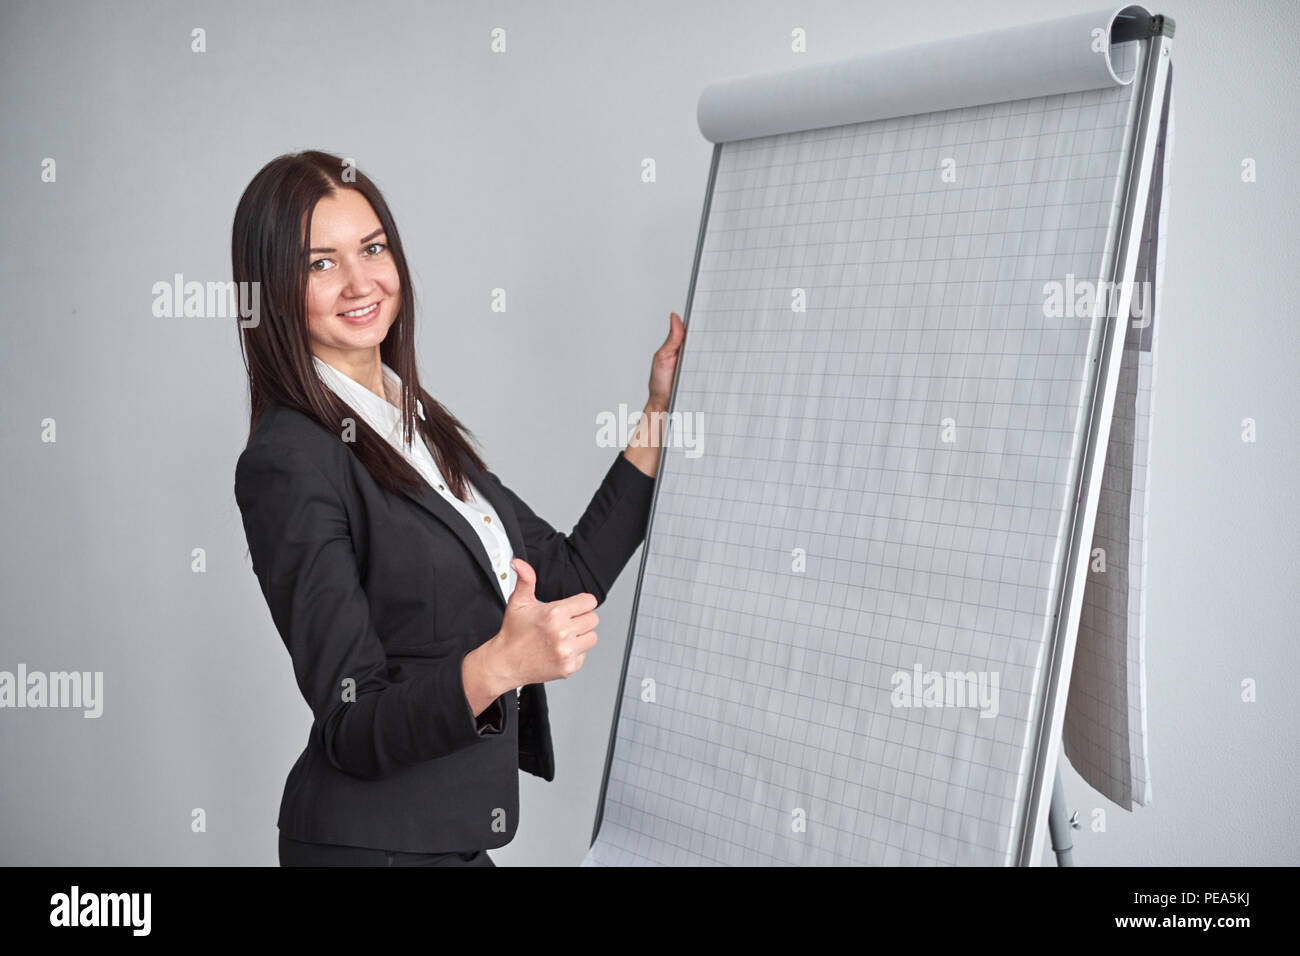 Portrait of young smiling businesswoman standing by flipchart in office Stock Photo